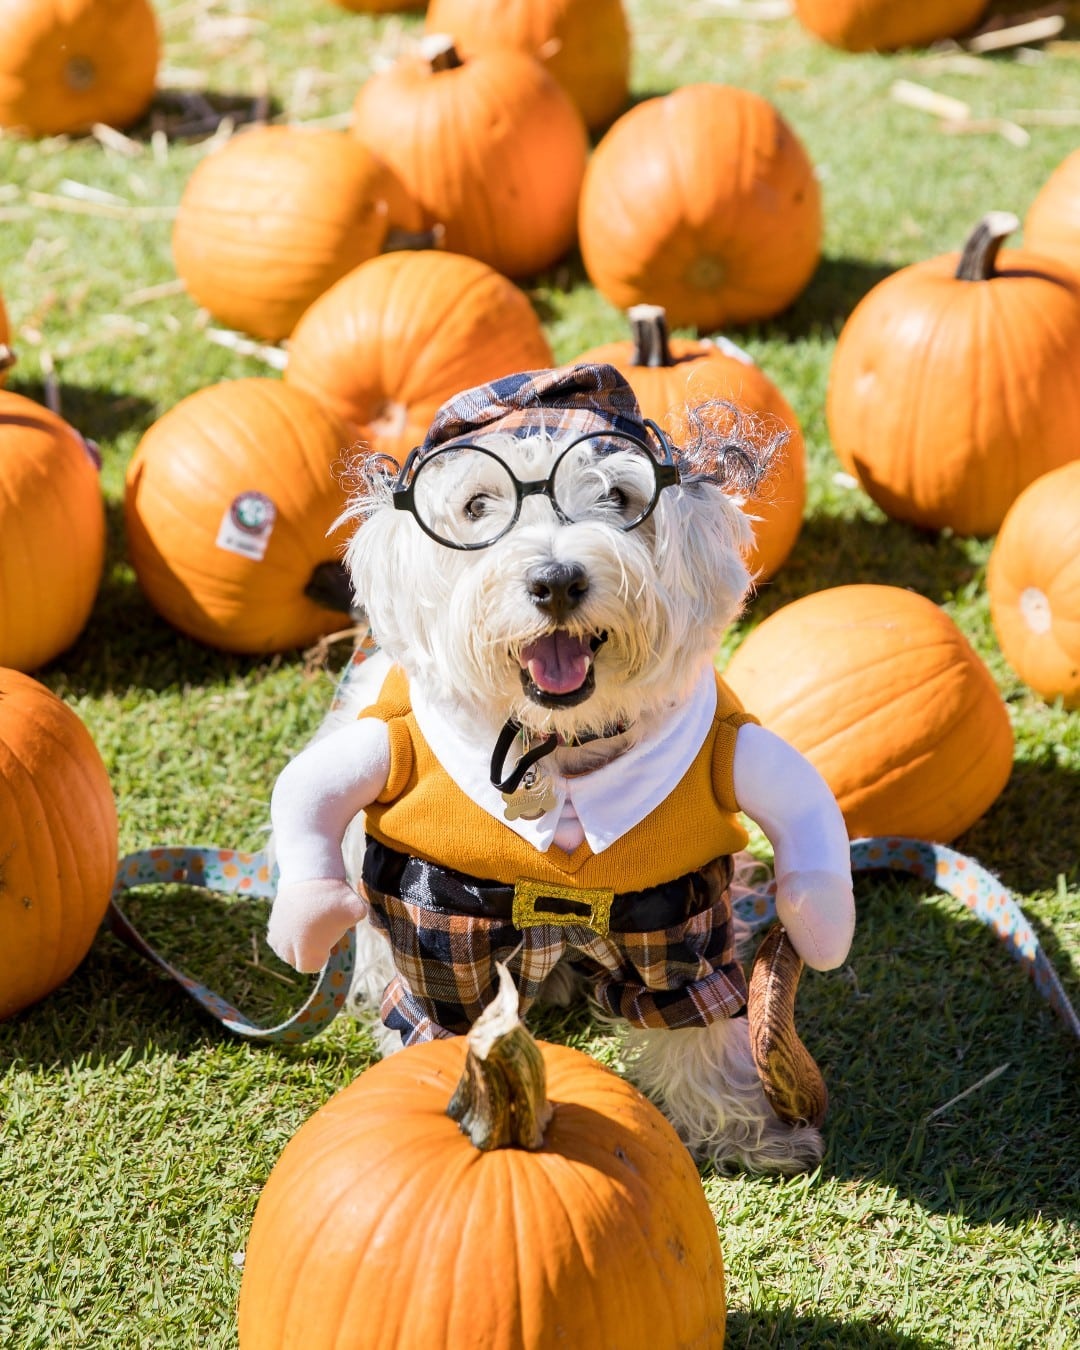 Find the perfect costume at Spirit Halloween, now open in the East Village Shops next to Nordstrom Rack. Whether you are shopping for your keiki, furry friend or yourself, Spirit Halloween has something for the whole family! What will you dress up as this year?